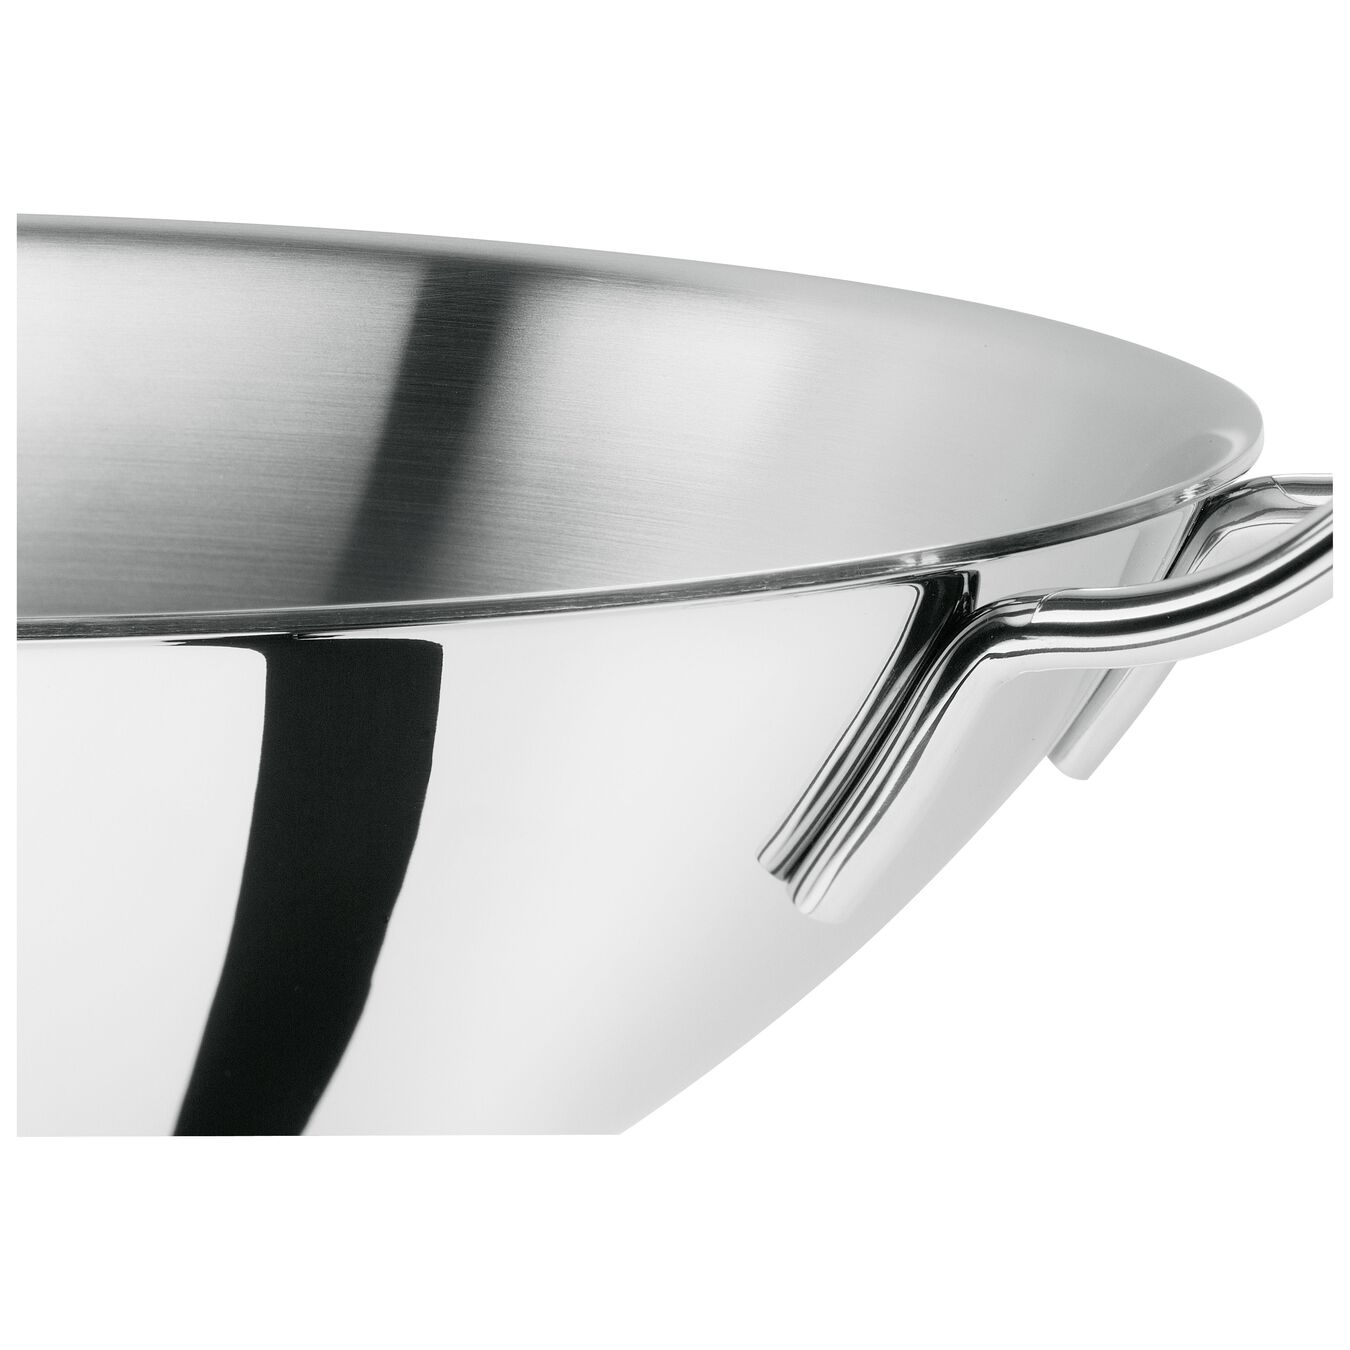 32 cm 18/10 Stainless Steel Wok,,large 7